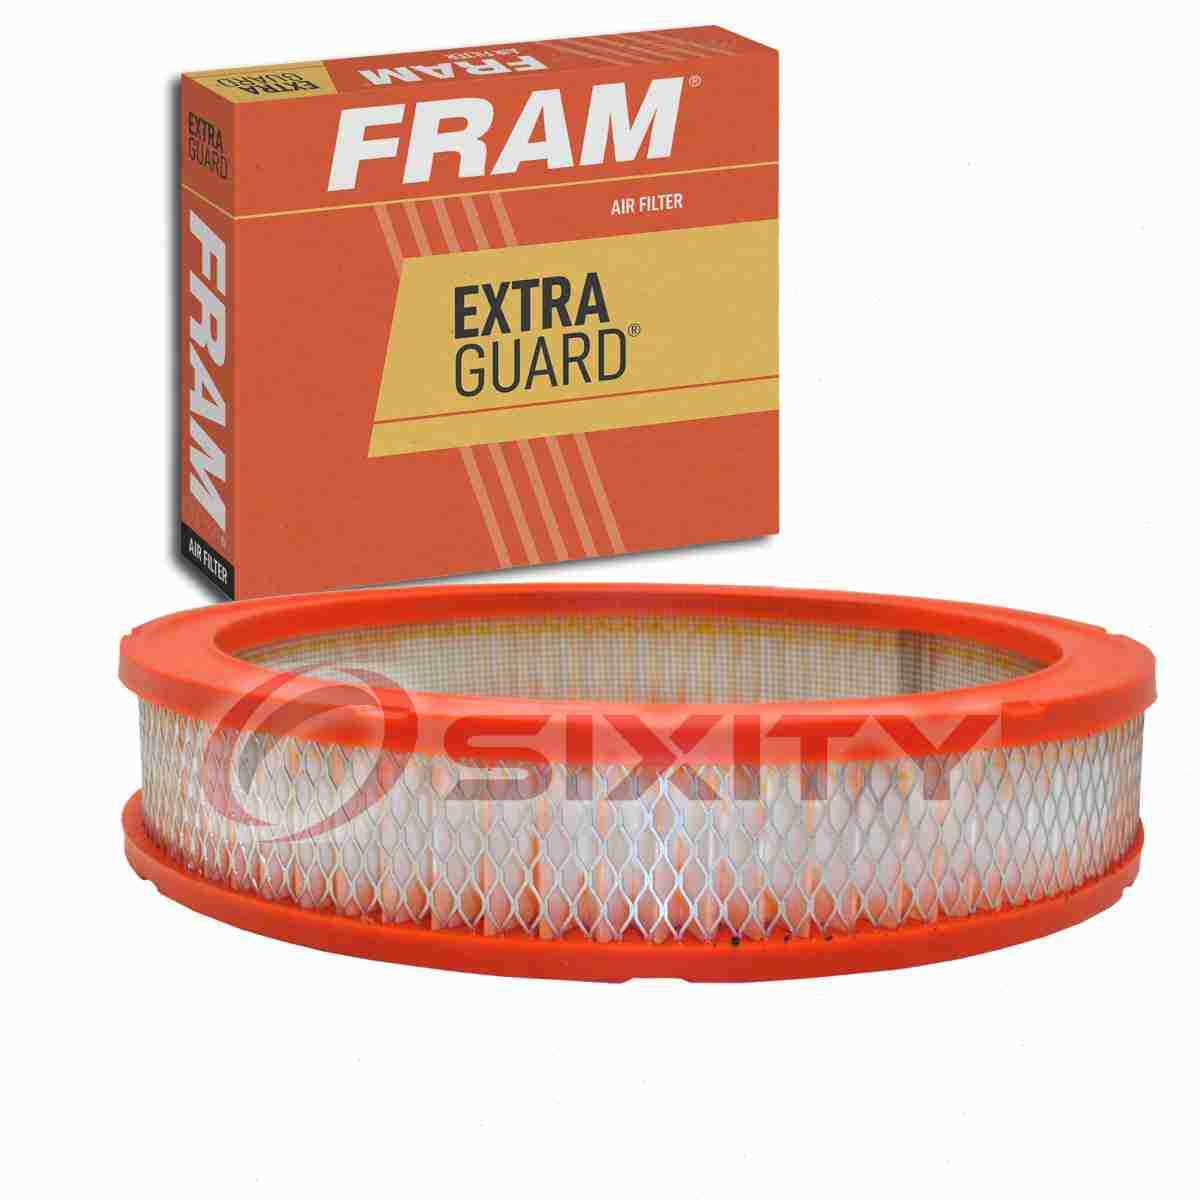 FRAM Extra Guard Air Filter for 1969-1979 Ford F-100 Intake Inlet Manifold pp